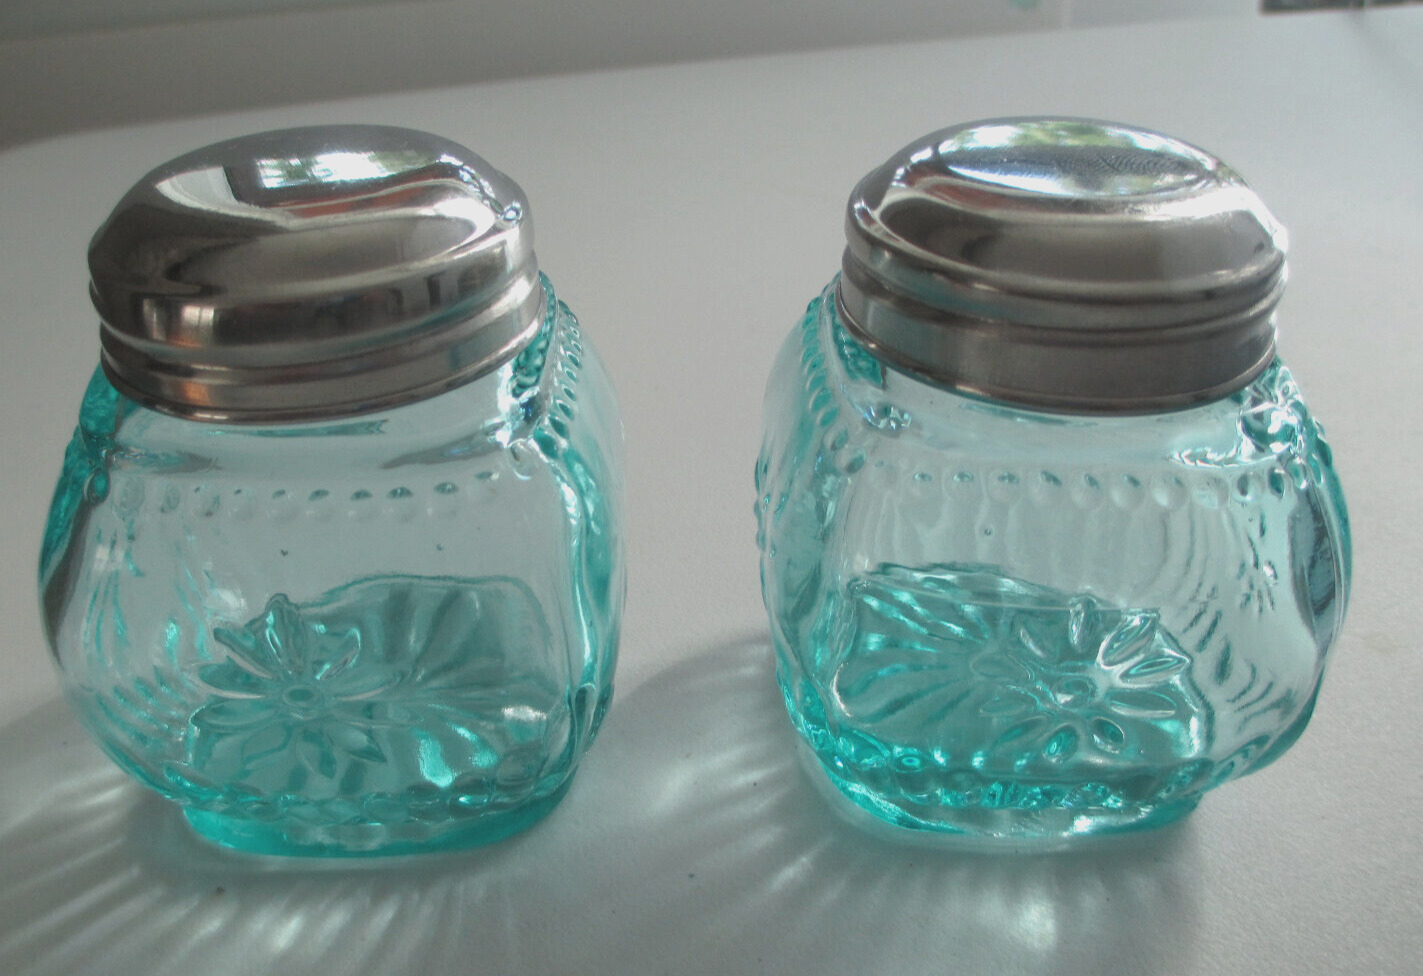 Pair of Aqua Spice Bottles with lids - Excellent condition